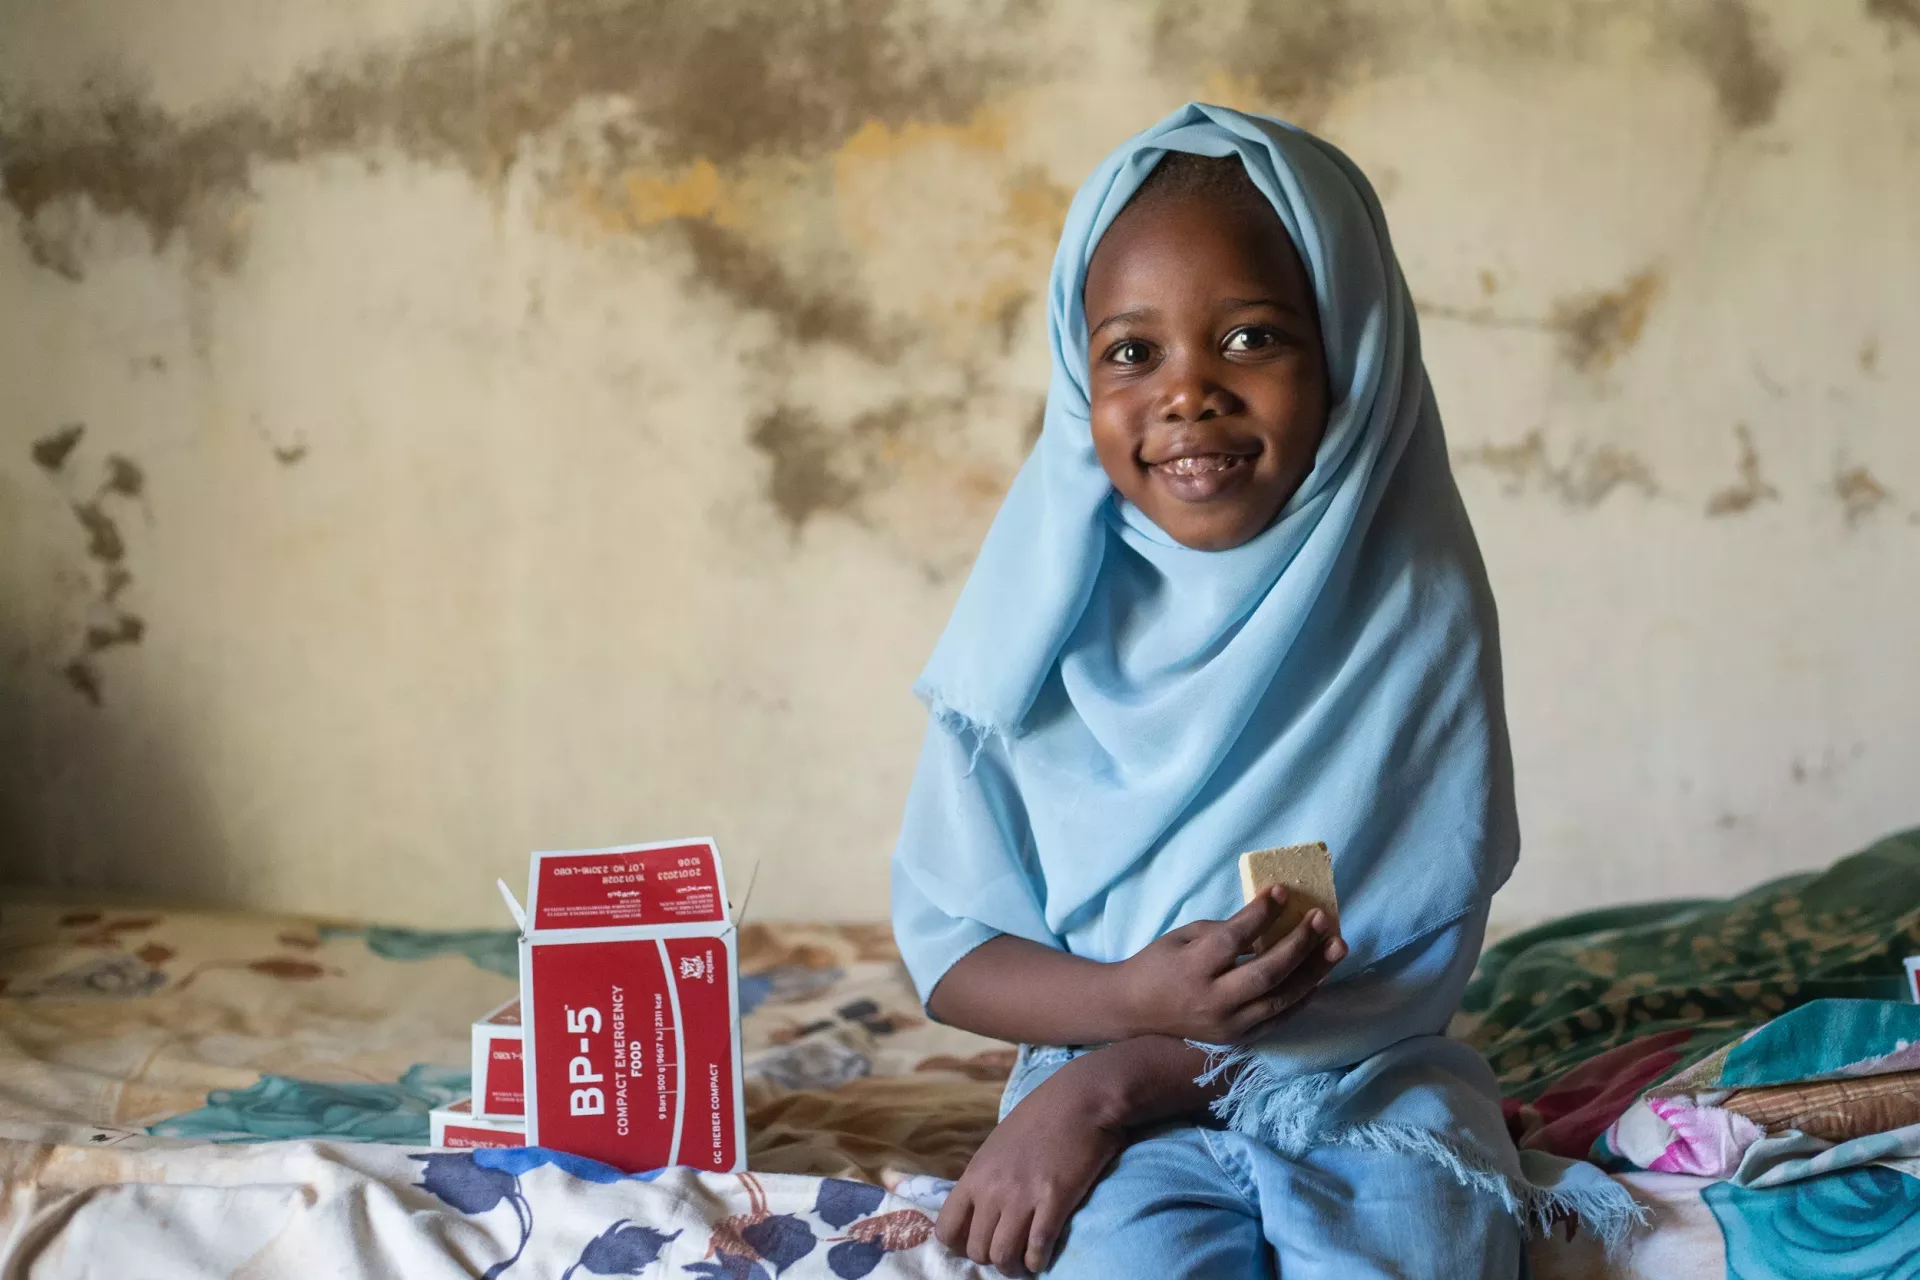 A young girl in a blue scarf nibbles on fortified biscuits provided during an integrated health campaign in Gezira State, Sudan.